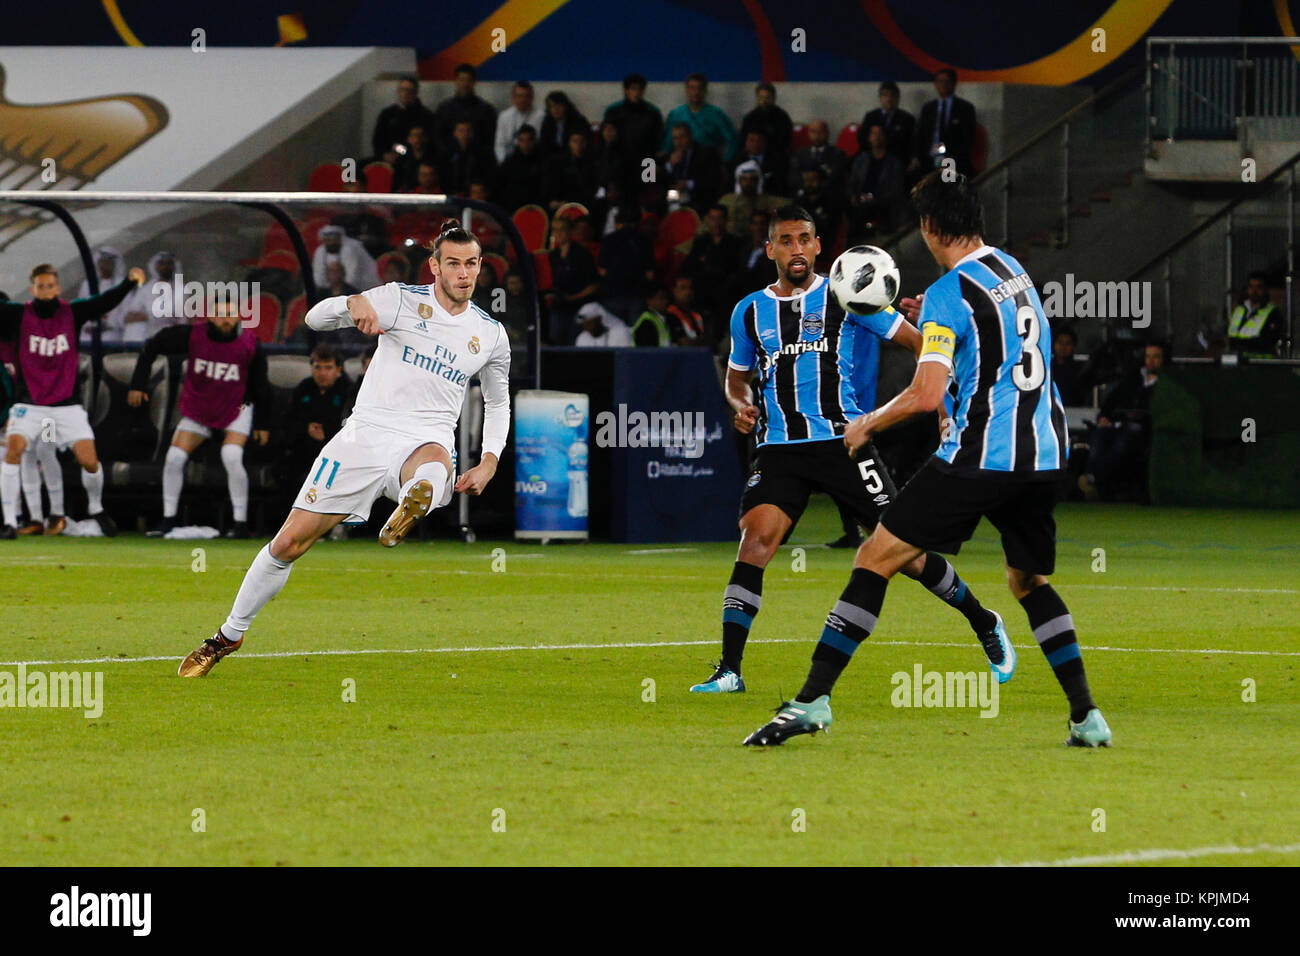 Gareth Bale (11) Real Madrid player. In action during the Club World Cup  final between Real Madrid v Gremio at the Zayed Sports City stadium in Abu  Dhabi, United Arab Emirates, December